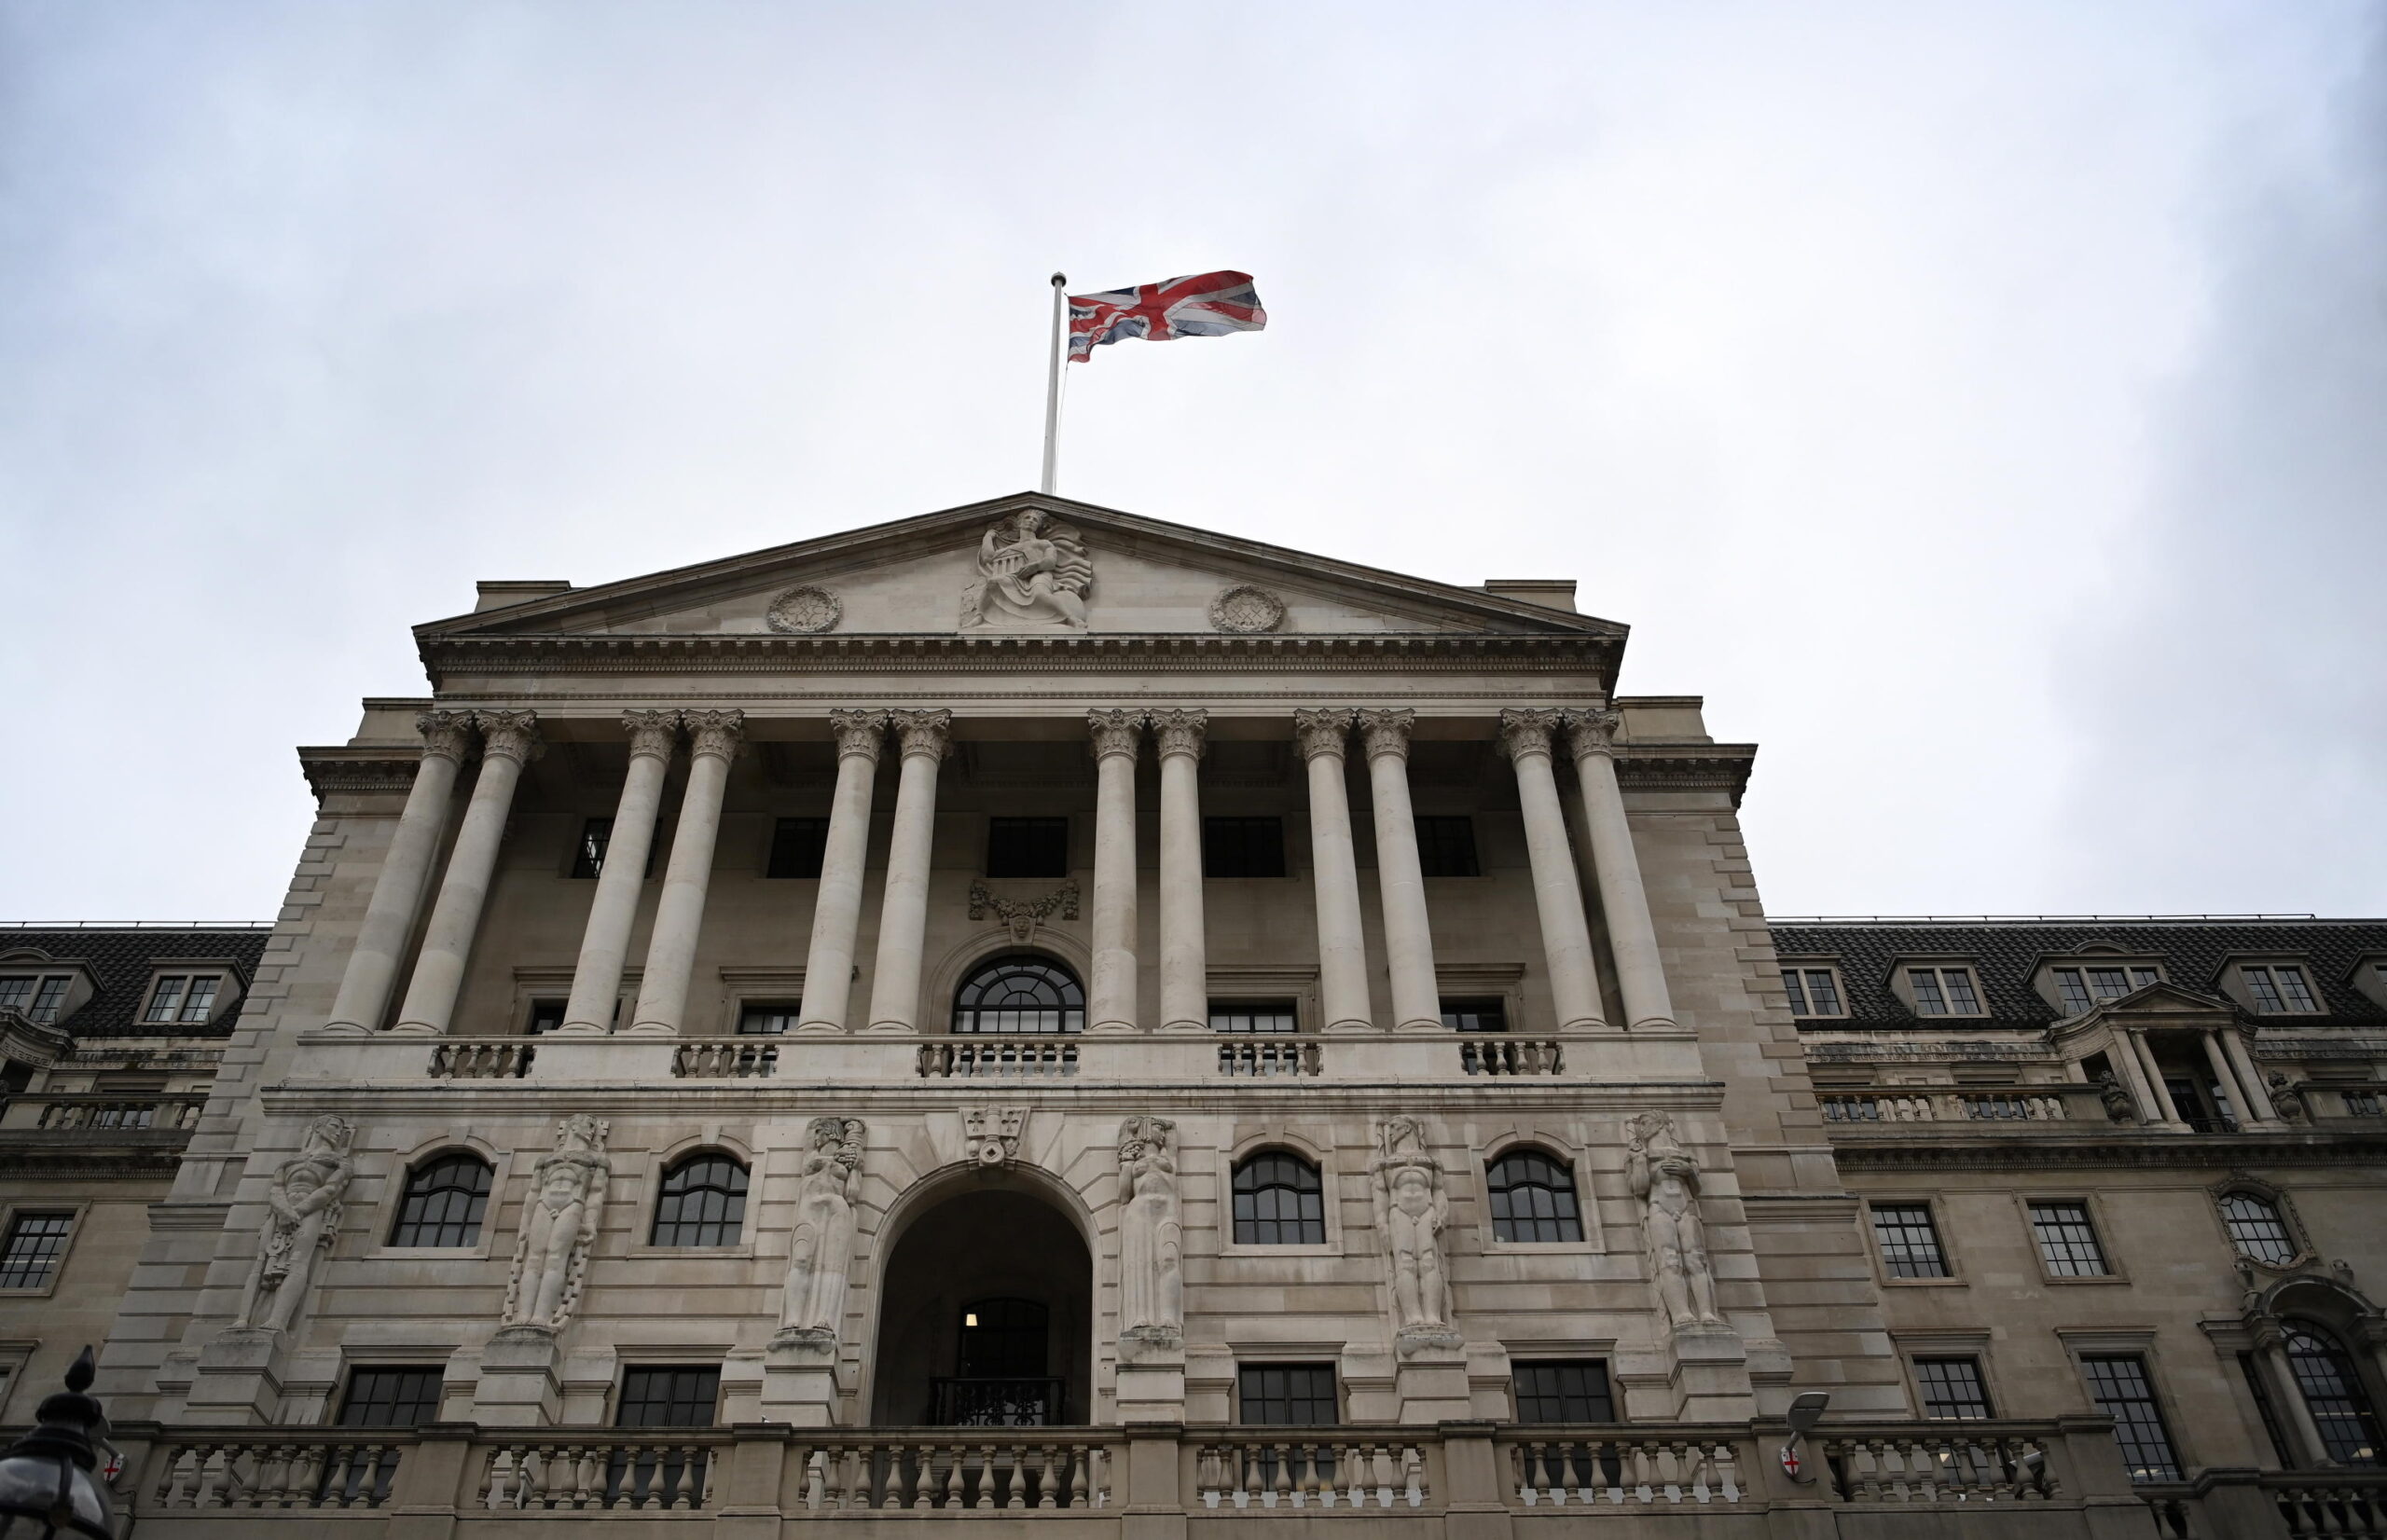 epa09724742 An exterior view of the Bank of England (BoE), Britain's central bank, in London, Britain, 03 February 2022. The Bank of England is expected to raise interest rates to counter the rise in inflation. Britain's energy regulator Office of Gas and Electricity Markets (Ofgem) announced on the day that the energy price cap will increase from 01 April for approximately 22 million customers. The increase is driven by an 'unprecedented record' rise in global gas prices over the last six months, with wholesale prices quadrupling in the last year. The UK Treasury is expected to announce a government-backed loan scheme to help ease soaring energy bills for millions of households.  EPA/ANDY RAIN